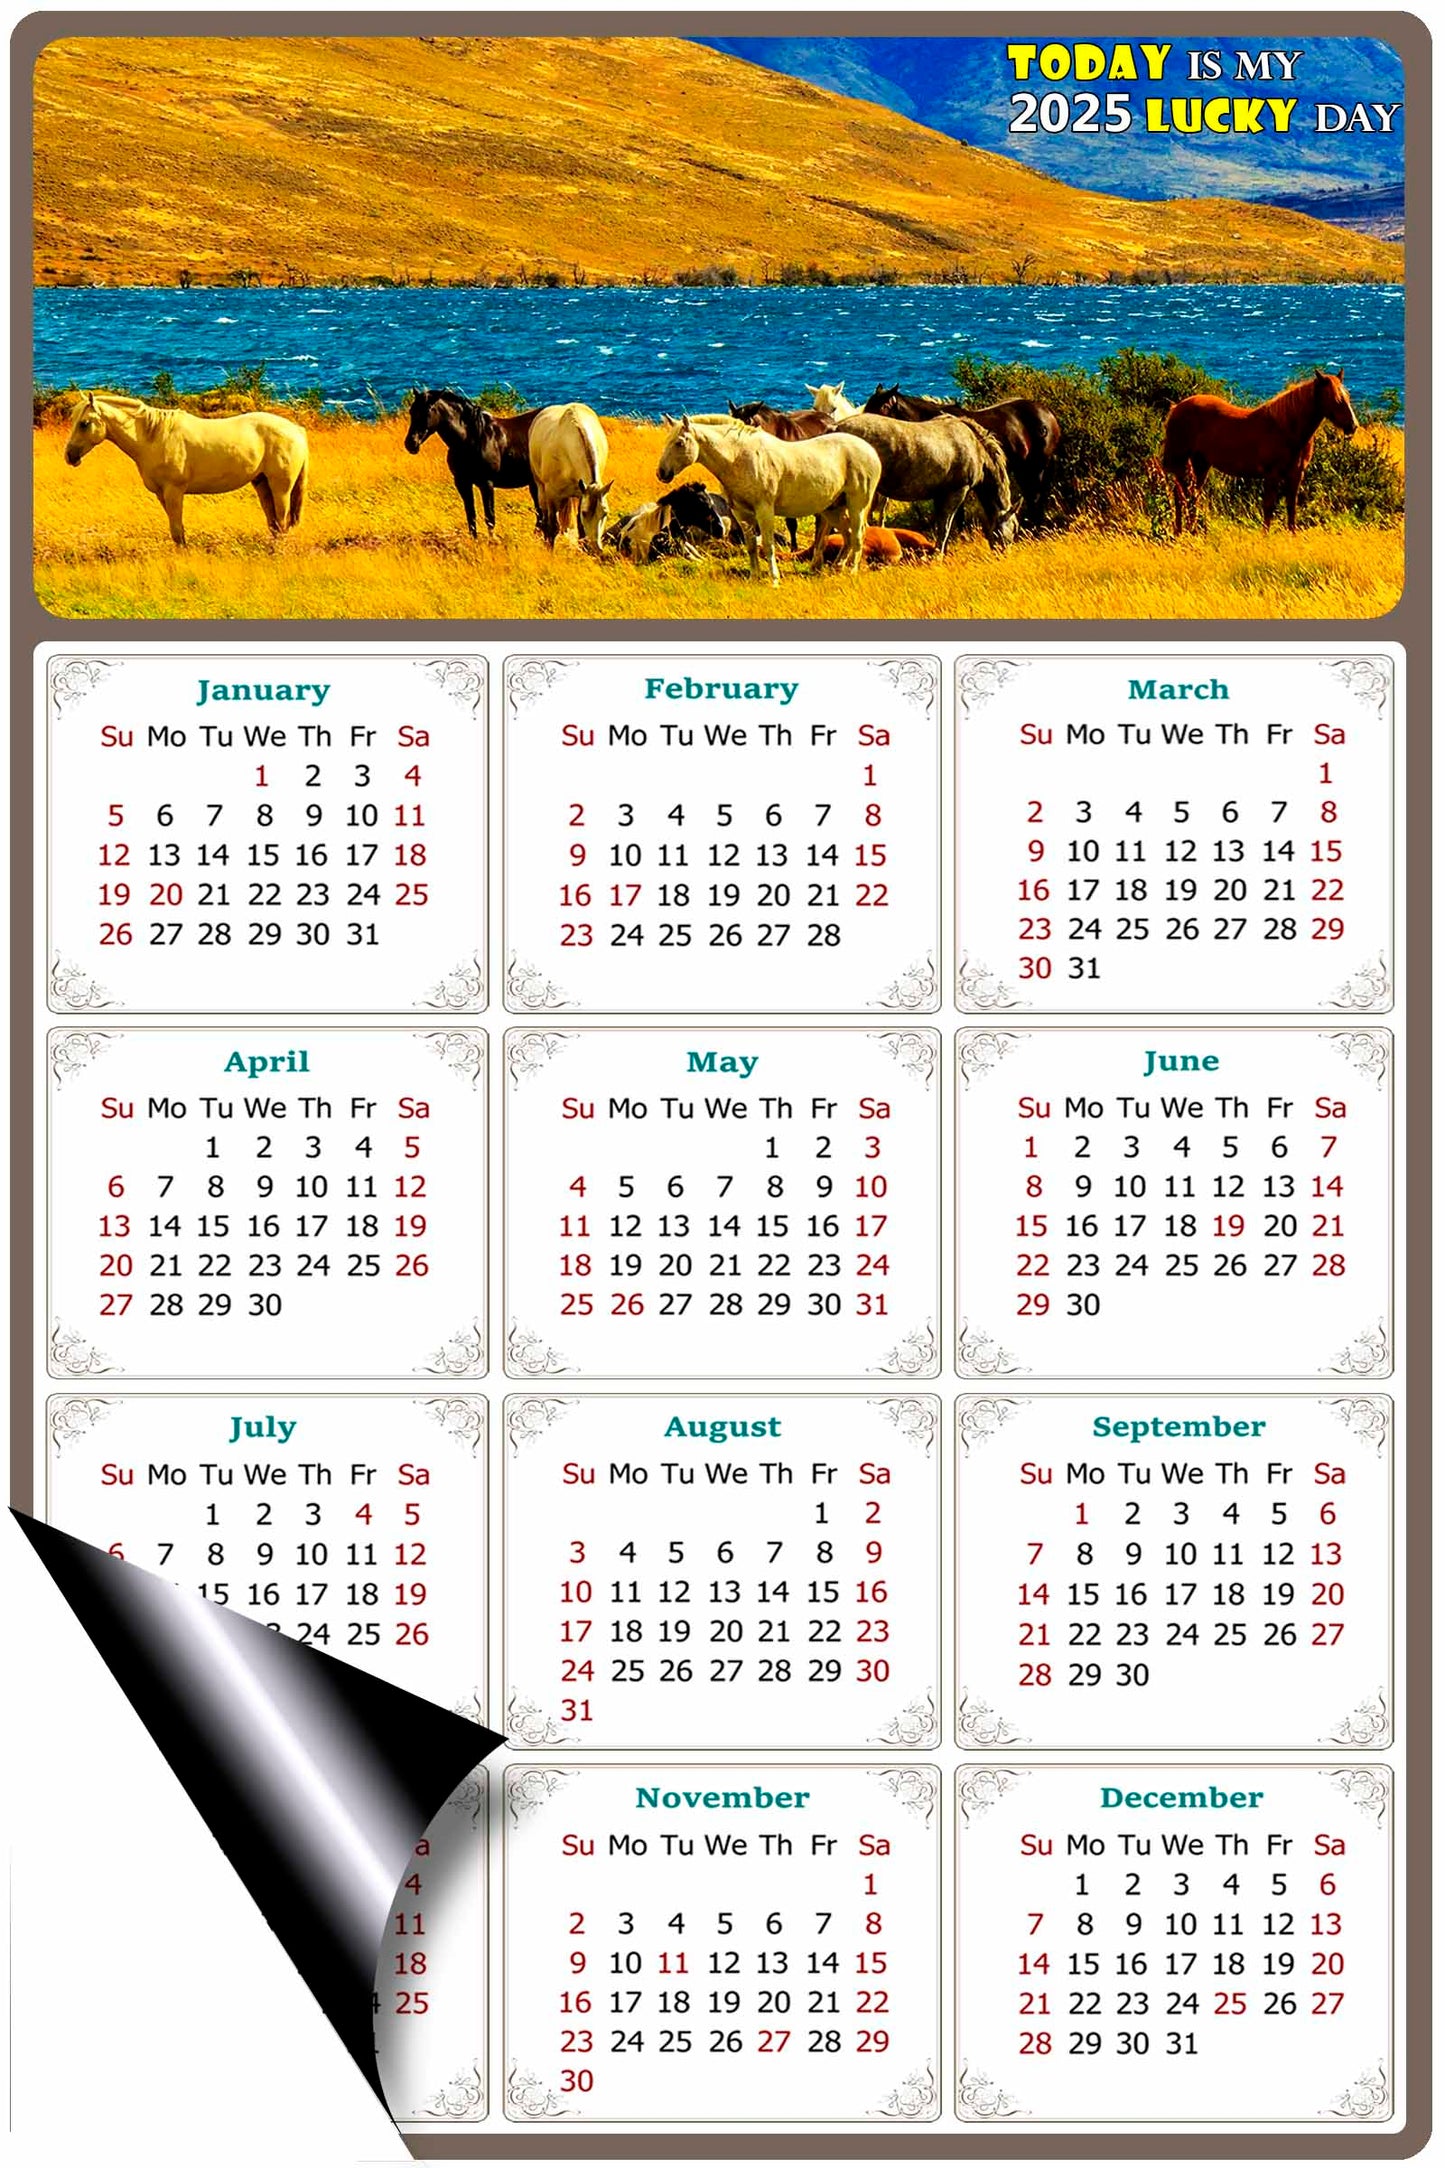 2025 Magnetic Calendar - Calendar Magnets - Today is my Lucky Day - (Fade, Tear, and Water Resistant) - Horses Themed 012